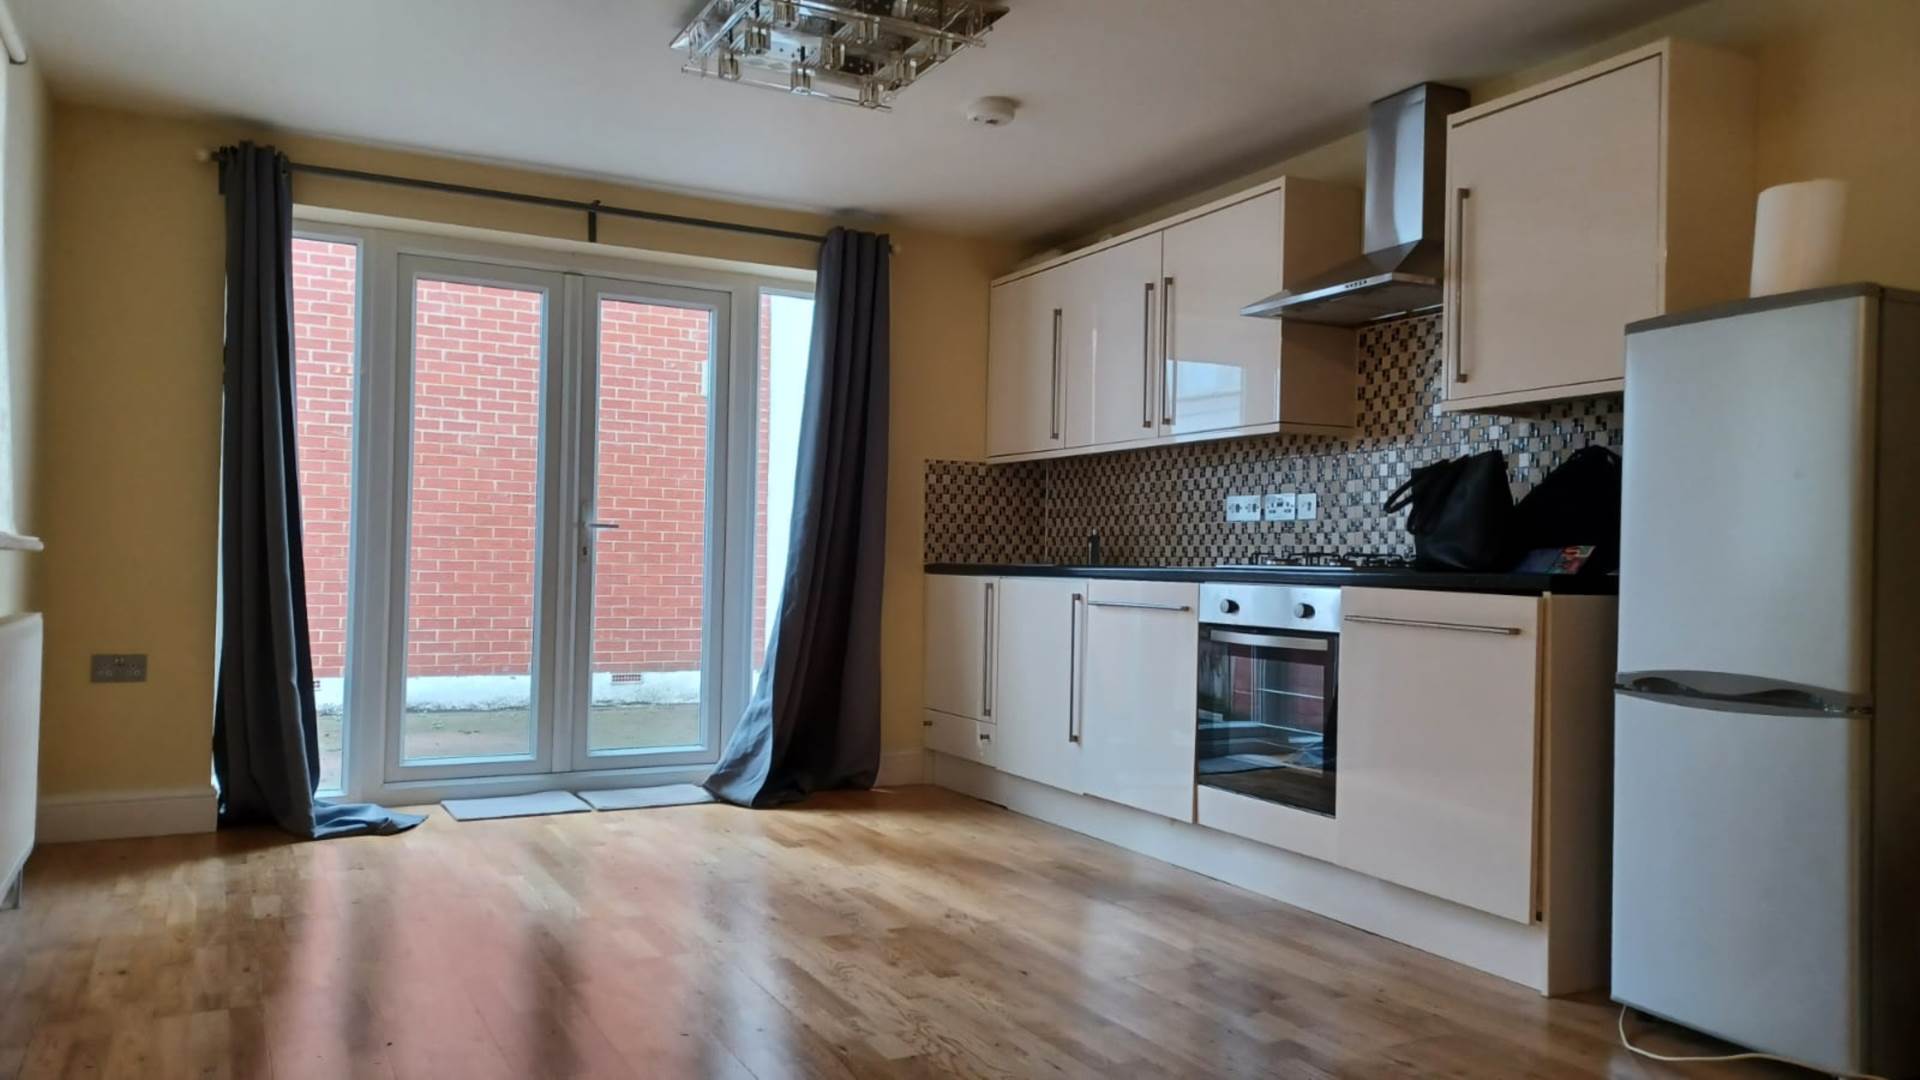 1 bed Detached House for rent in London. From Kings Accommodation